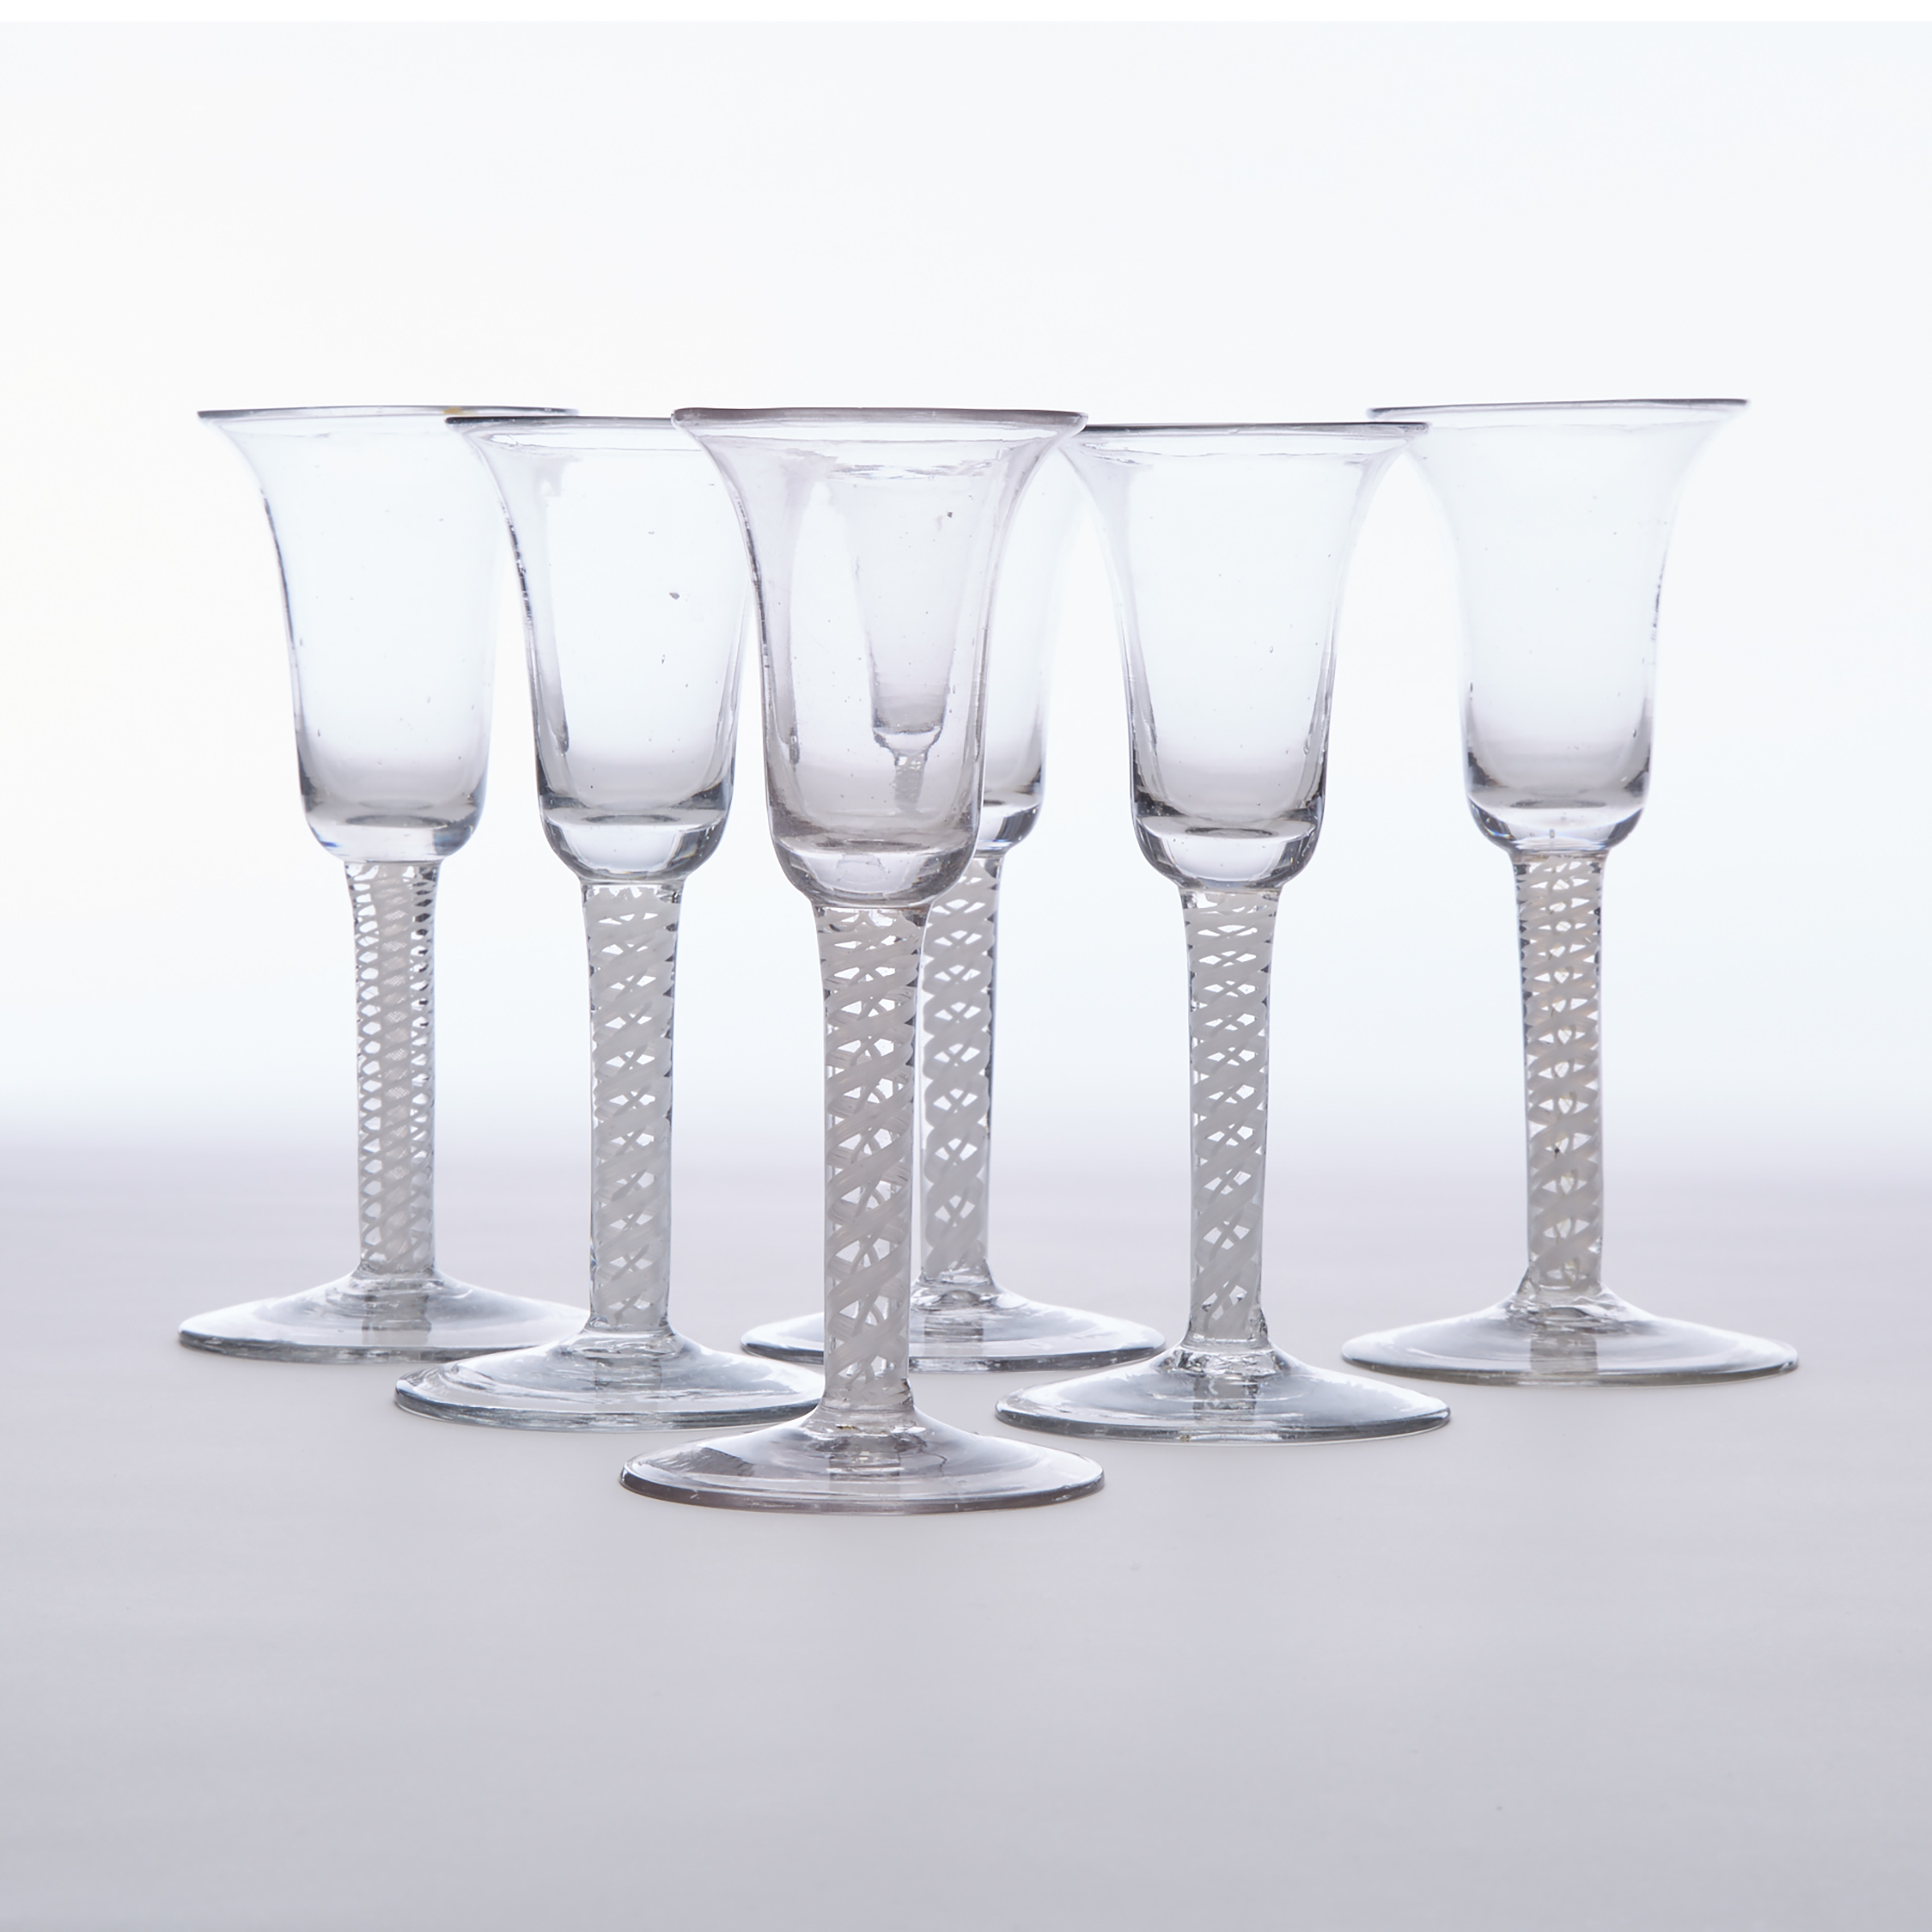 Six Continental Opaque Twist Stemmed Wine Glasses, late 18th century